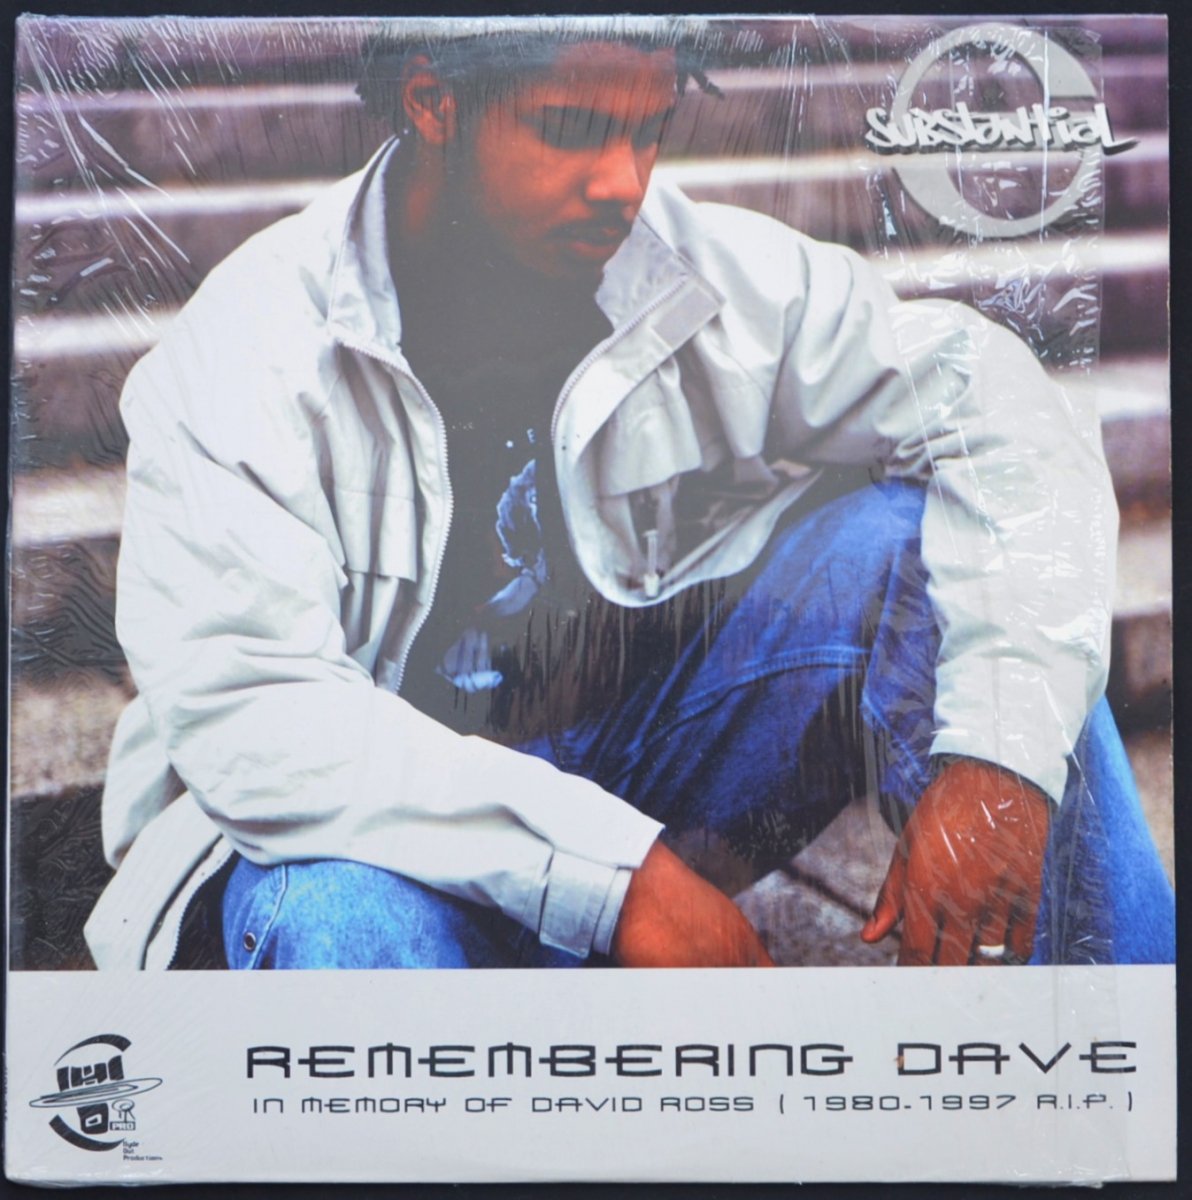 SUBSTANTIAL / REMEMBERING DAVE (12